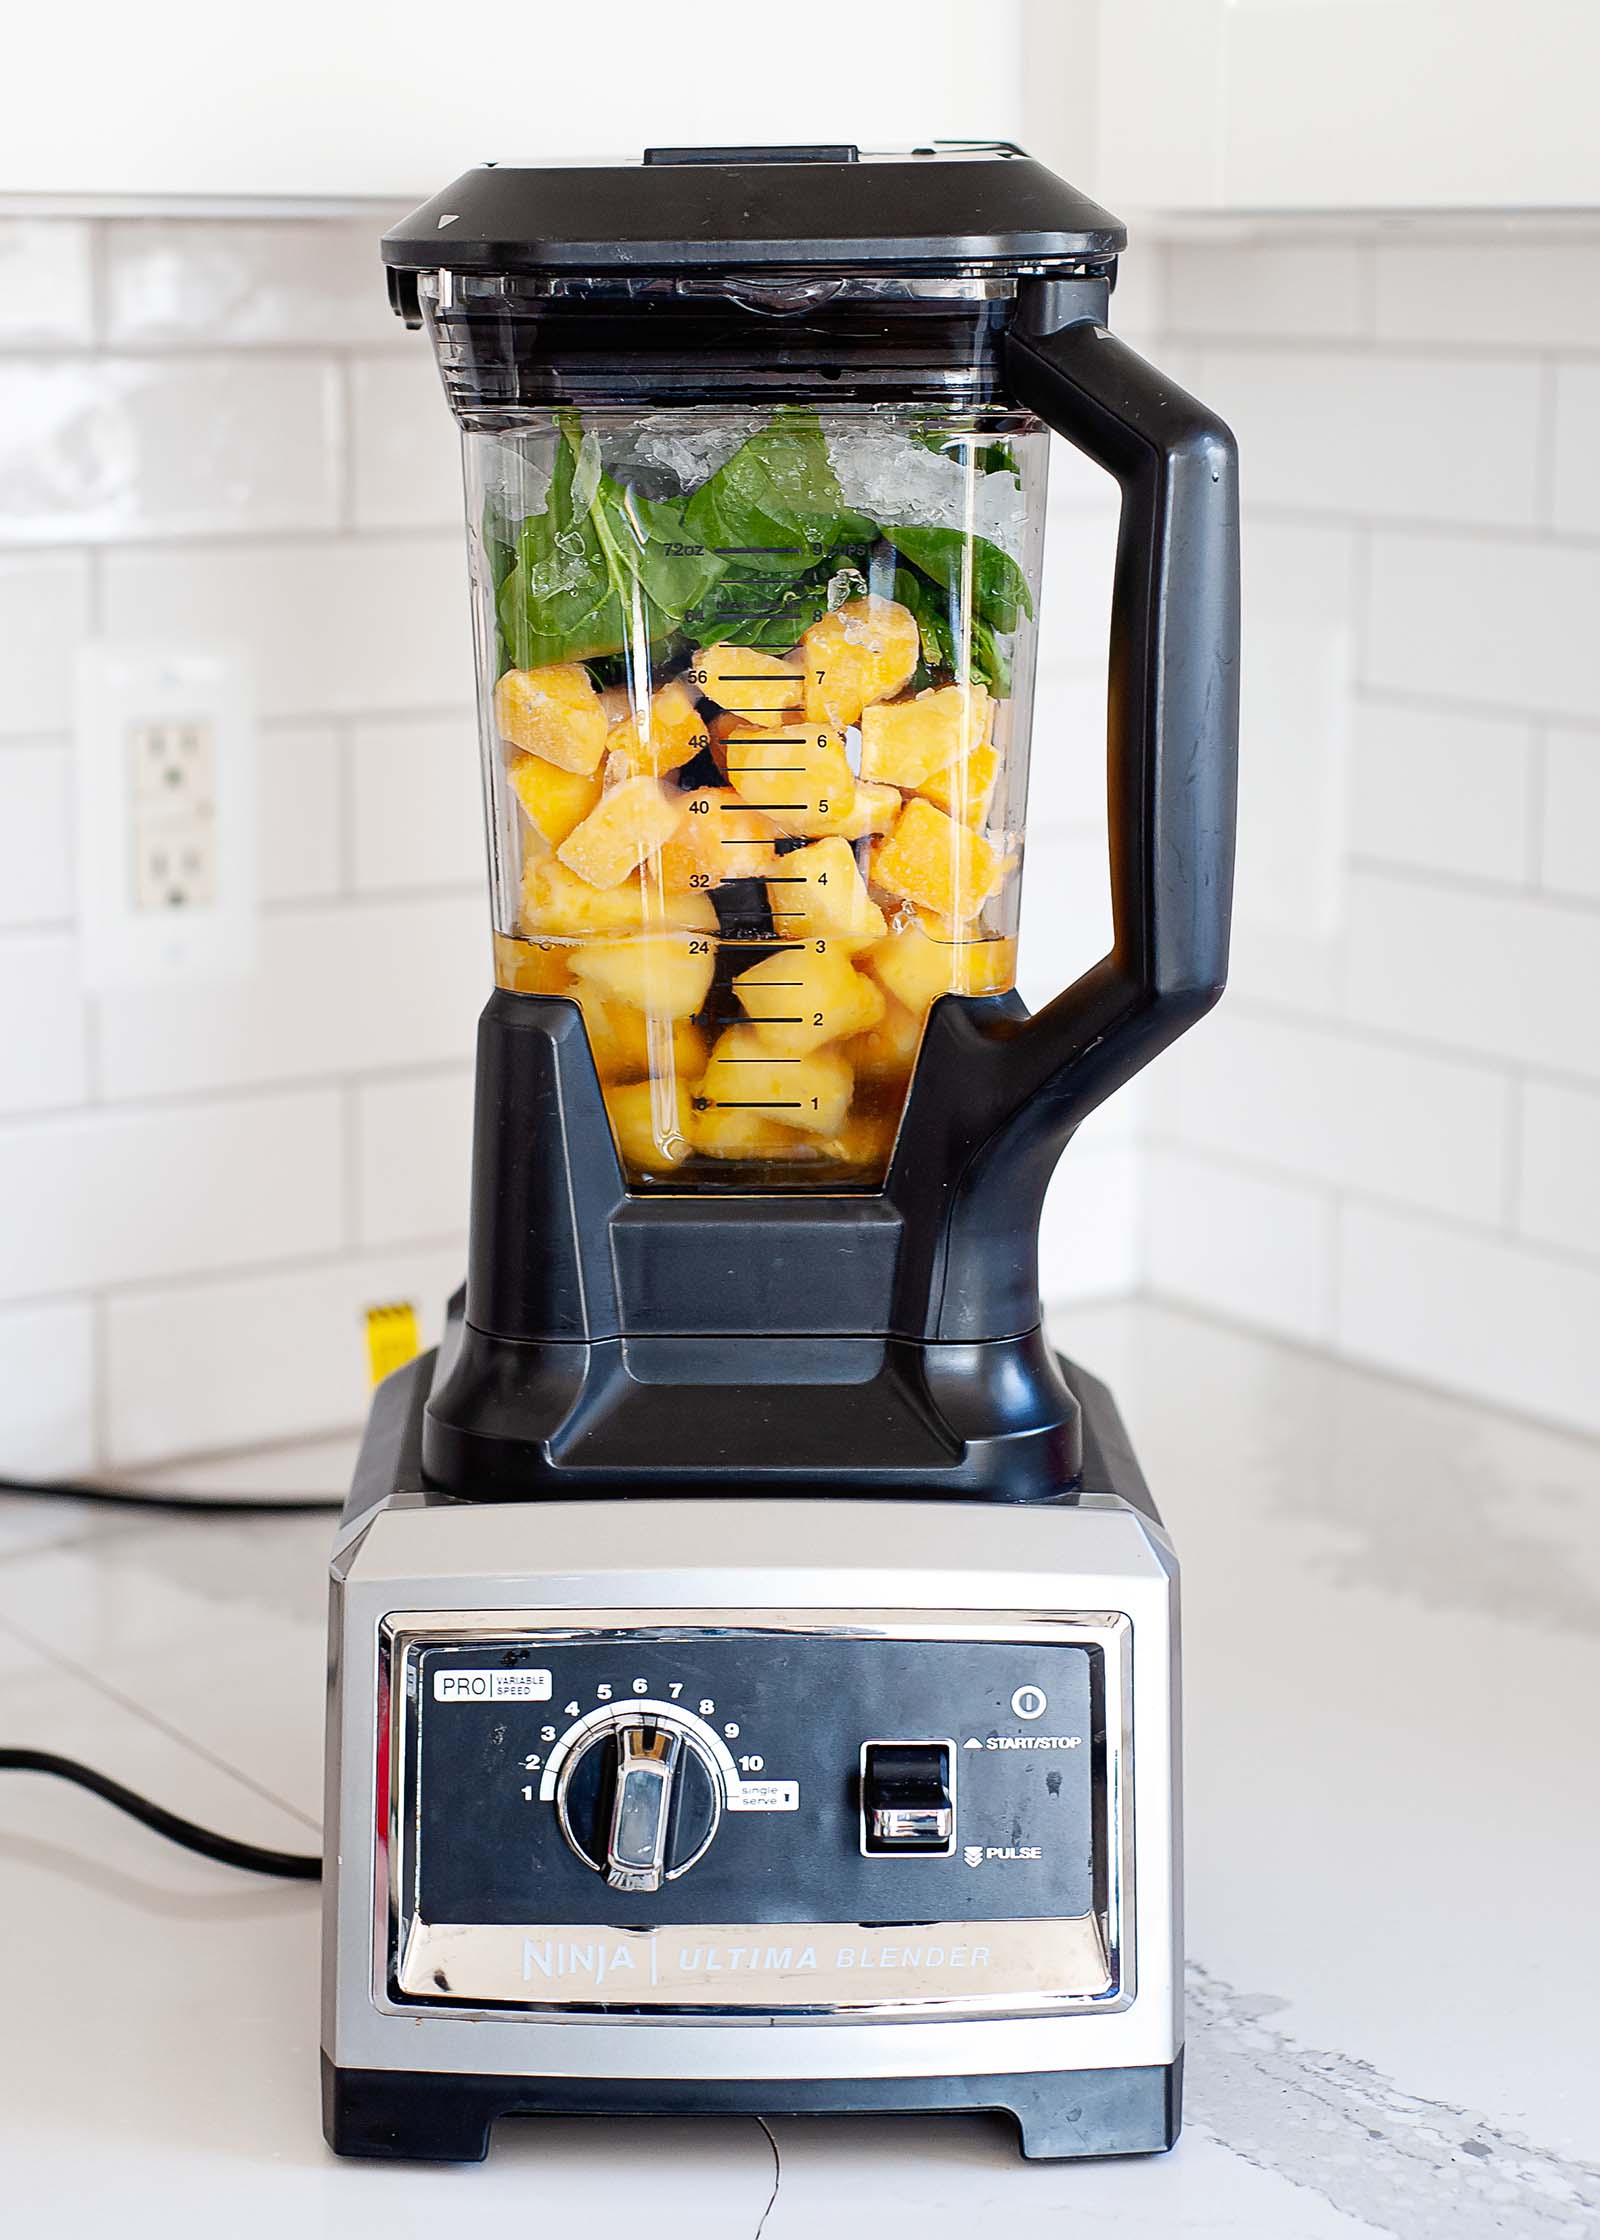 View of a high speed blender with pineapple and spinach inside. The blender sits on a white counter with subway tiled backsplash behind it.